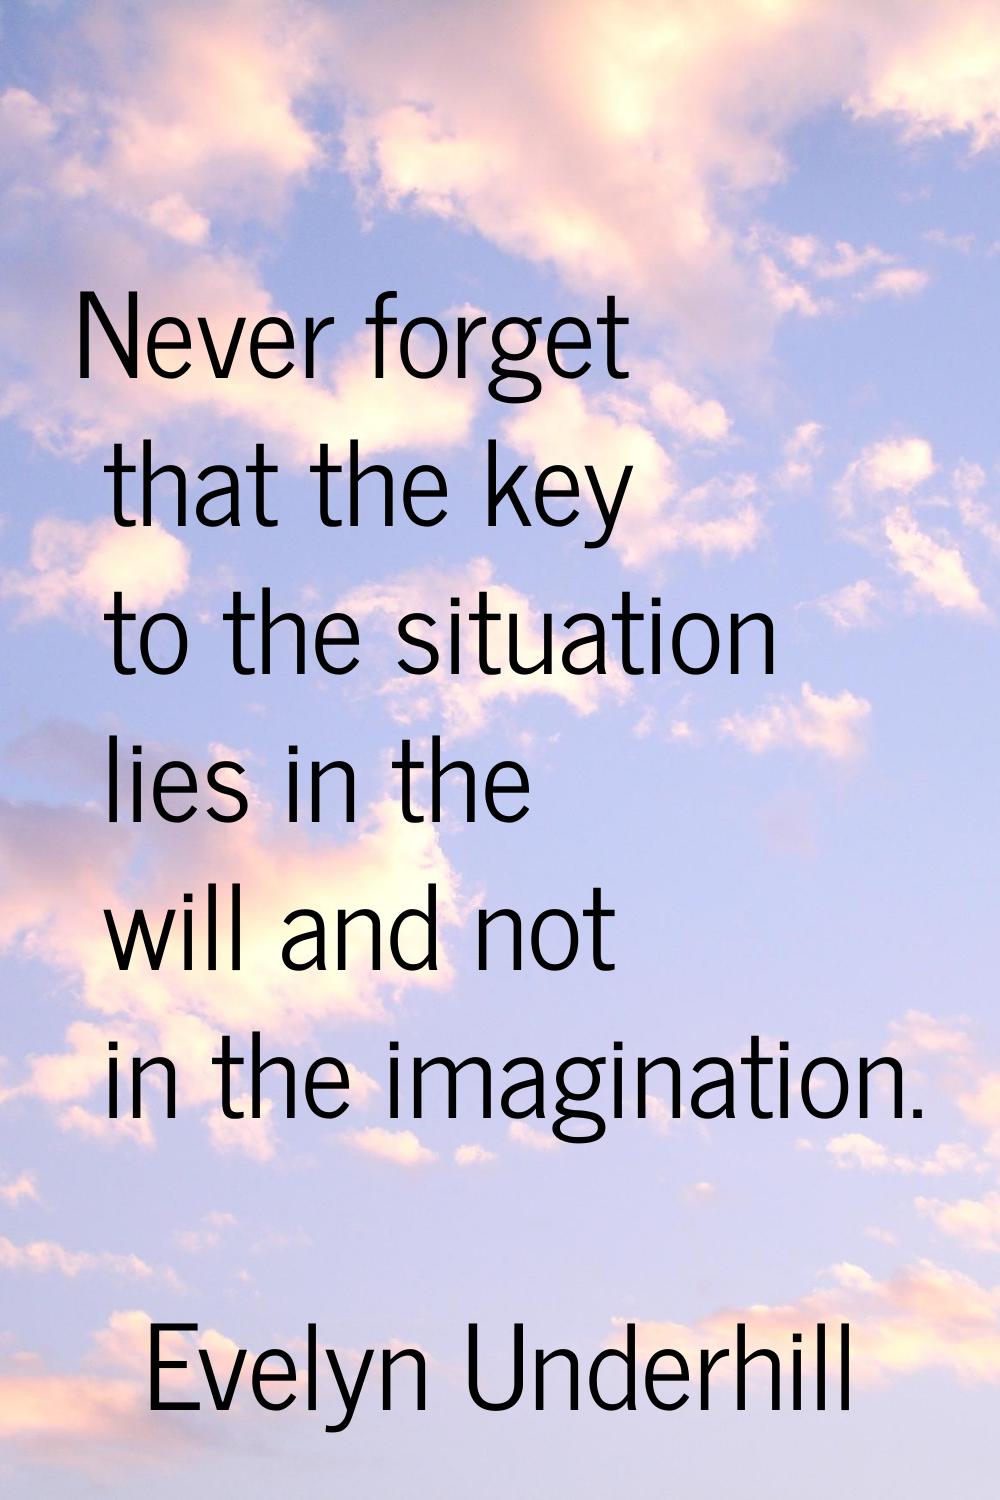 Never forget that the key to the situation lies in the will and not in the imagination.